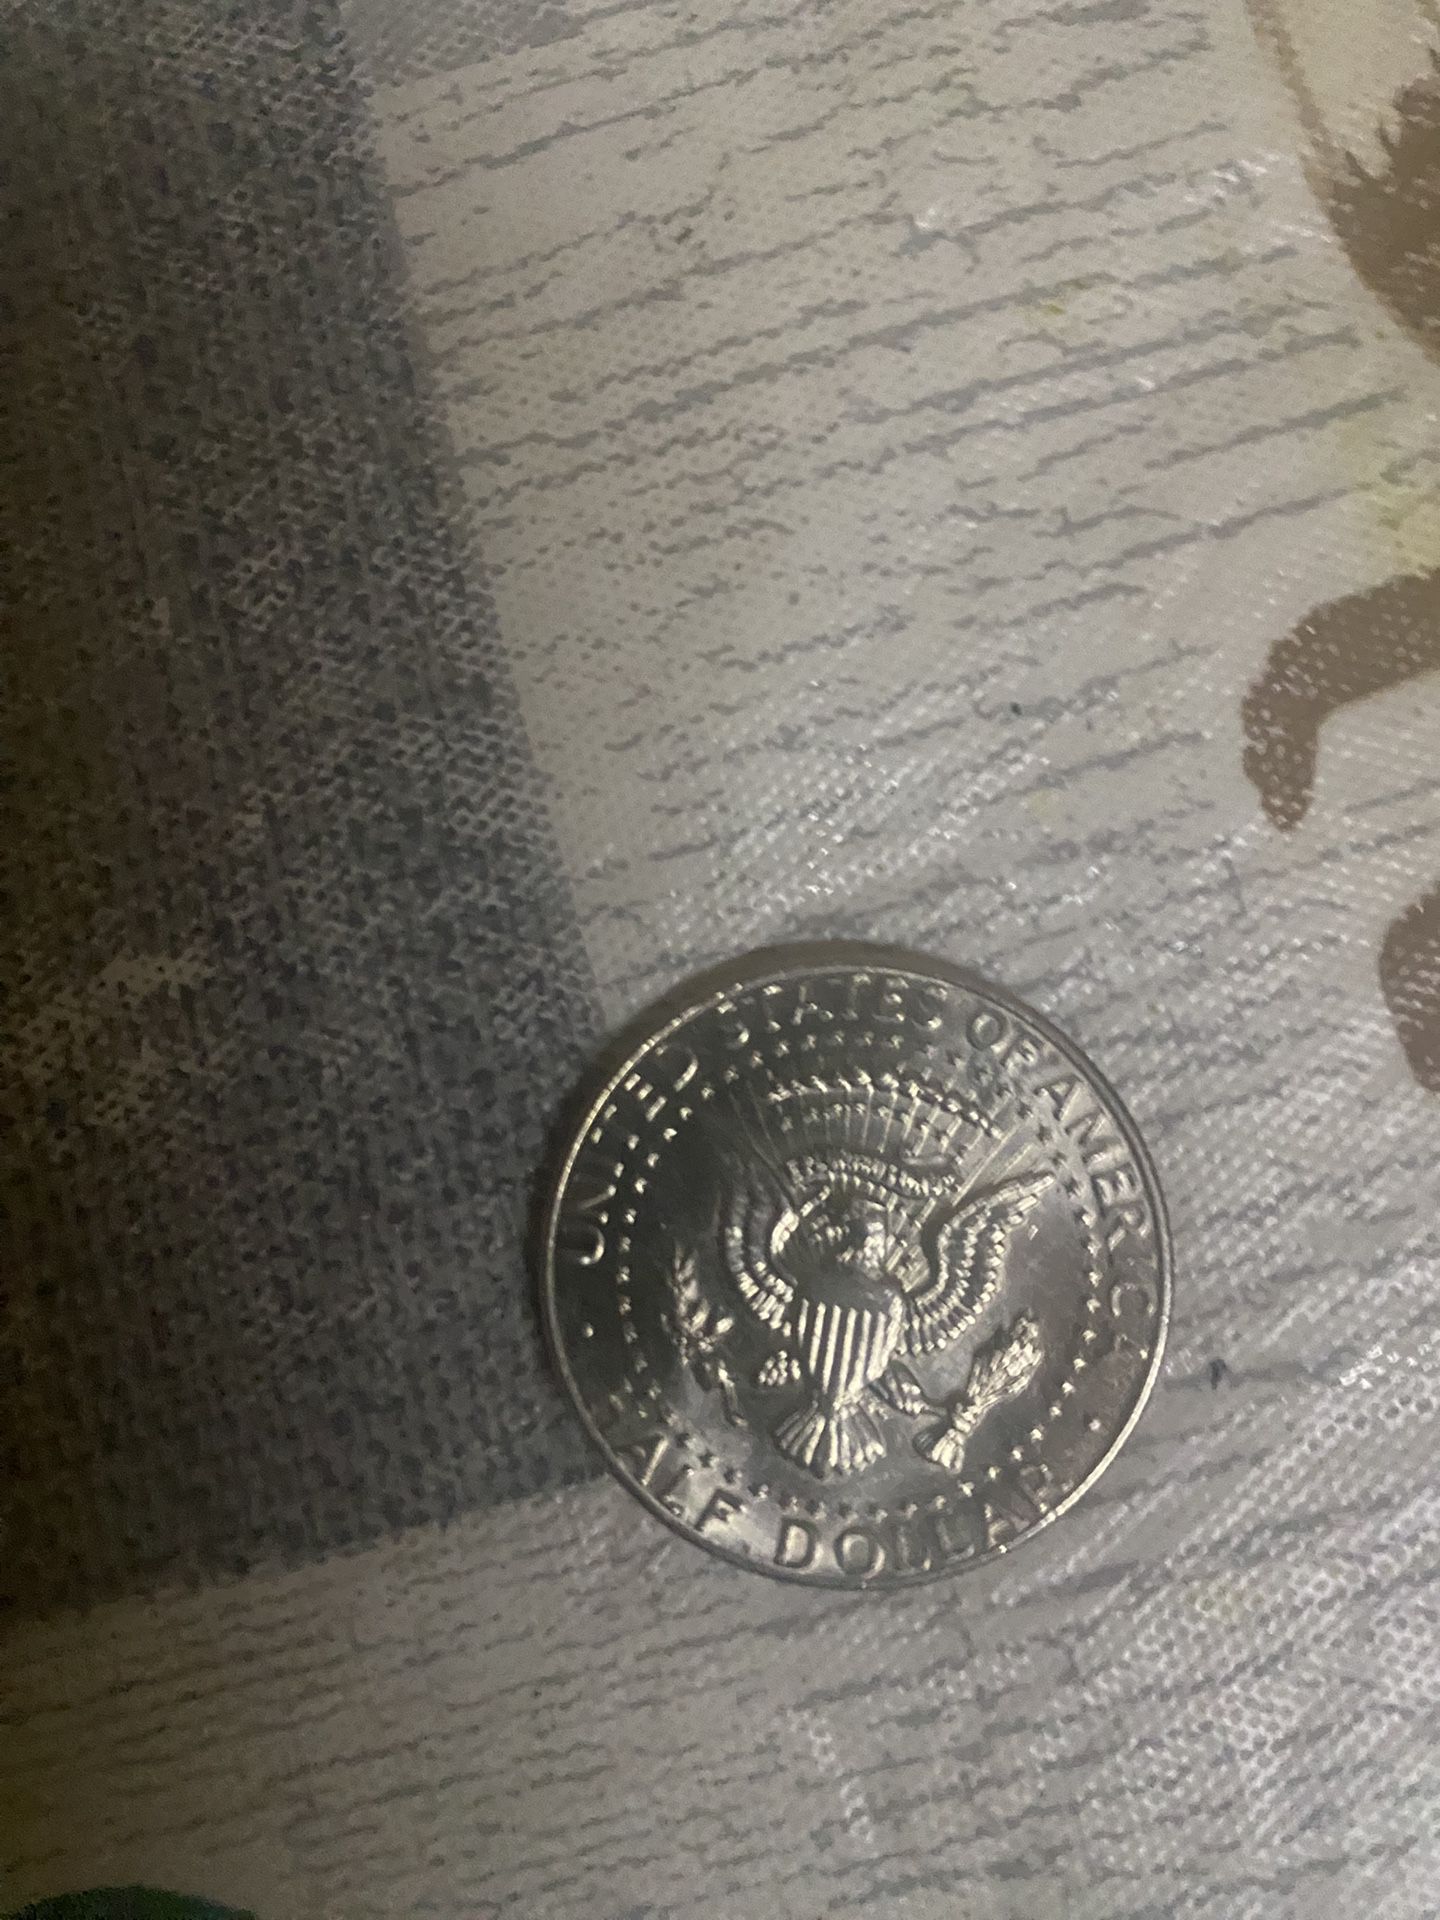 Trading This Coin Until I Get A Car Wroth 5$